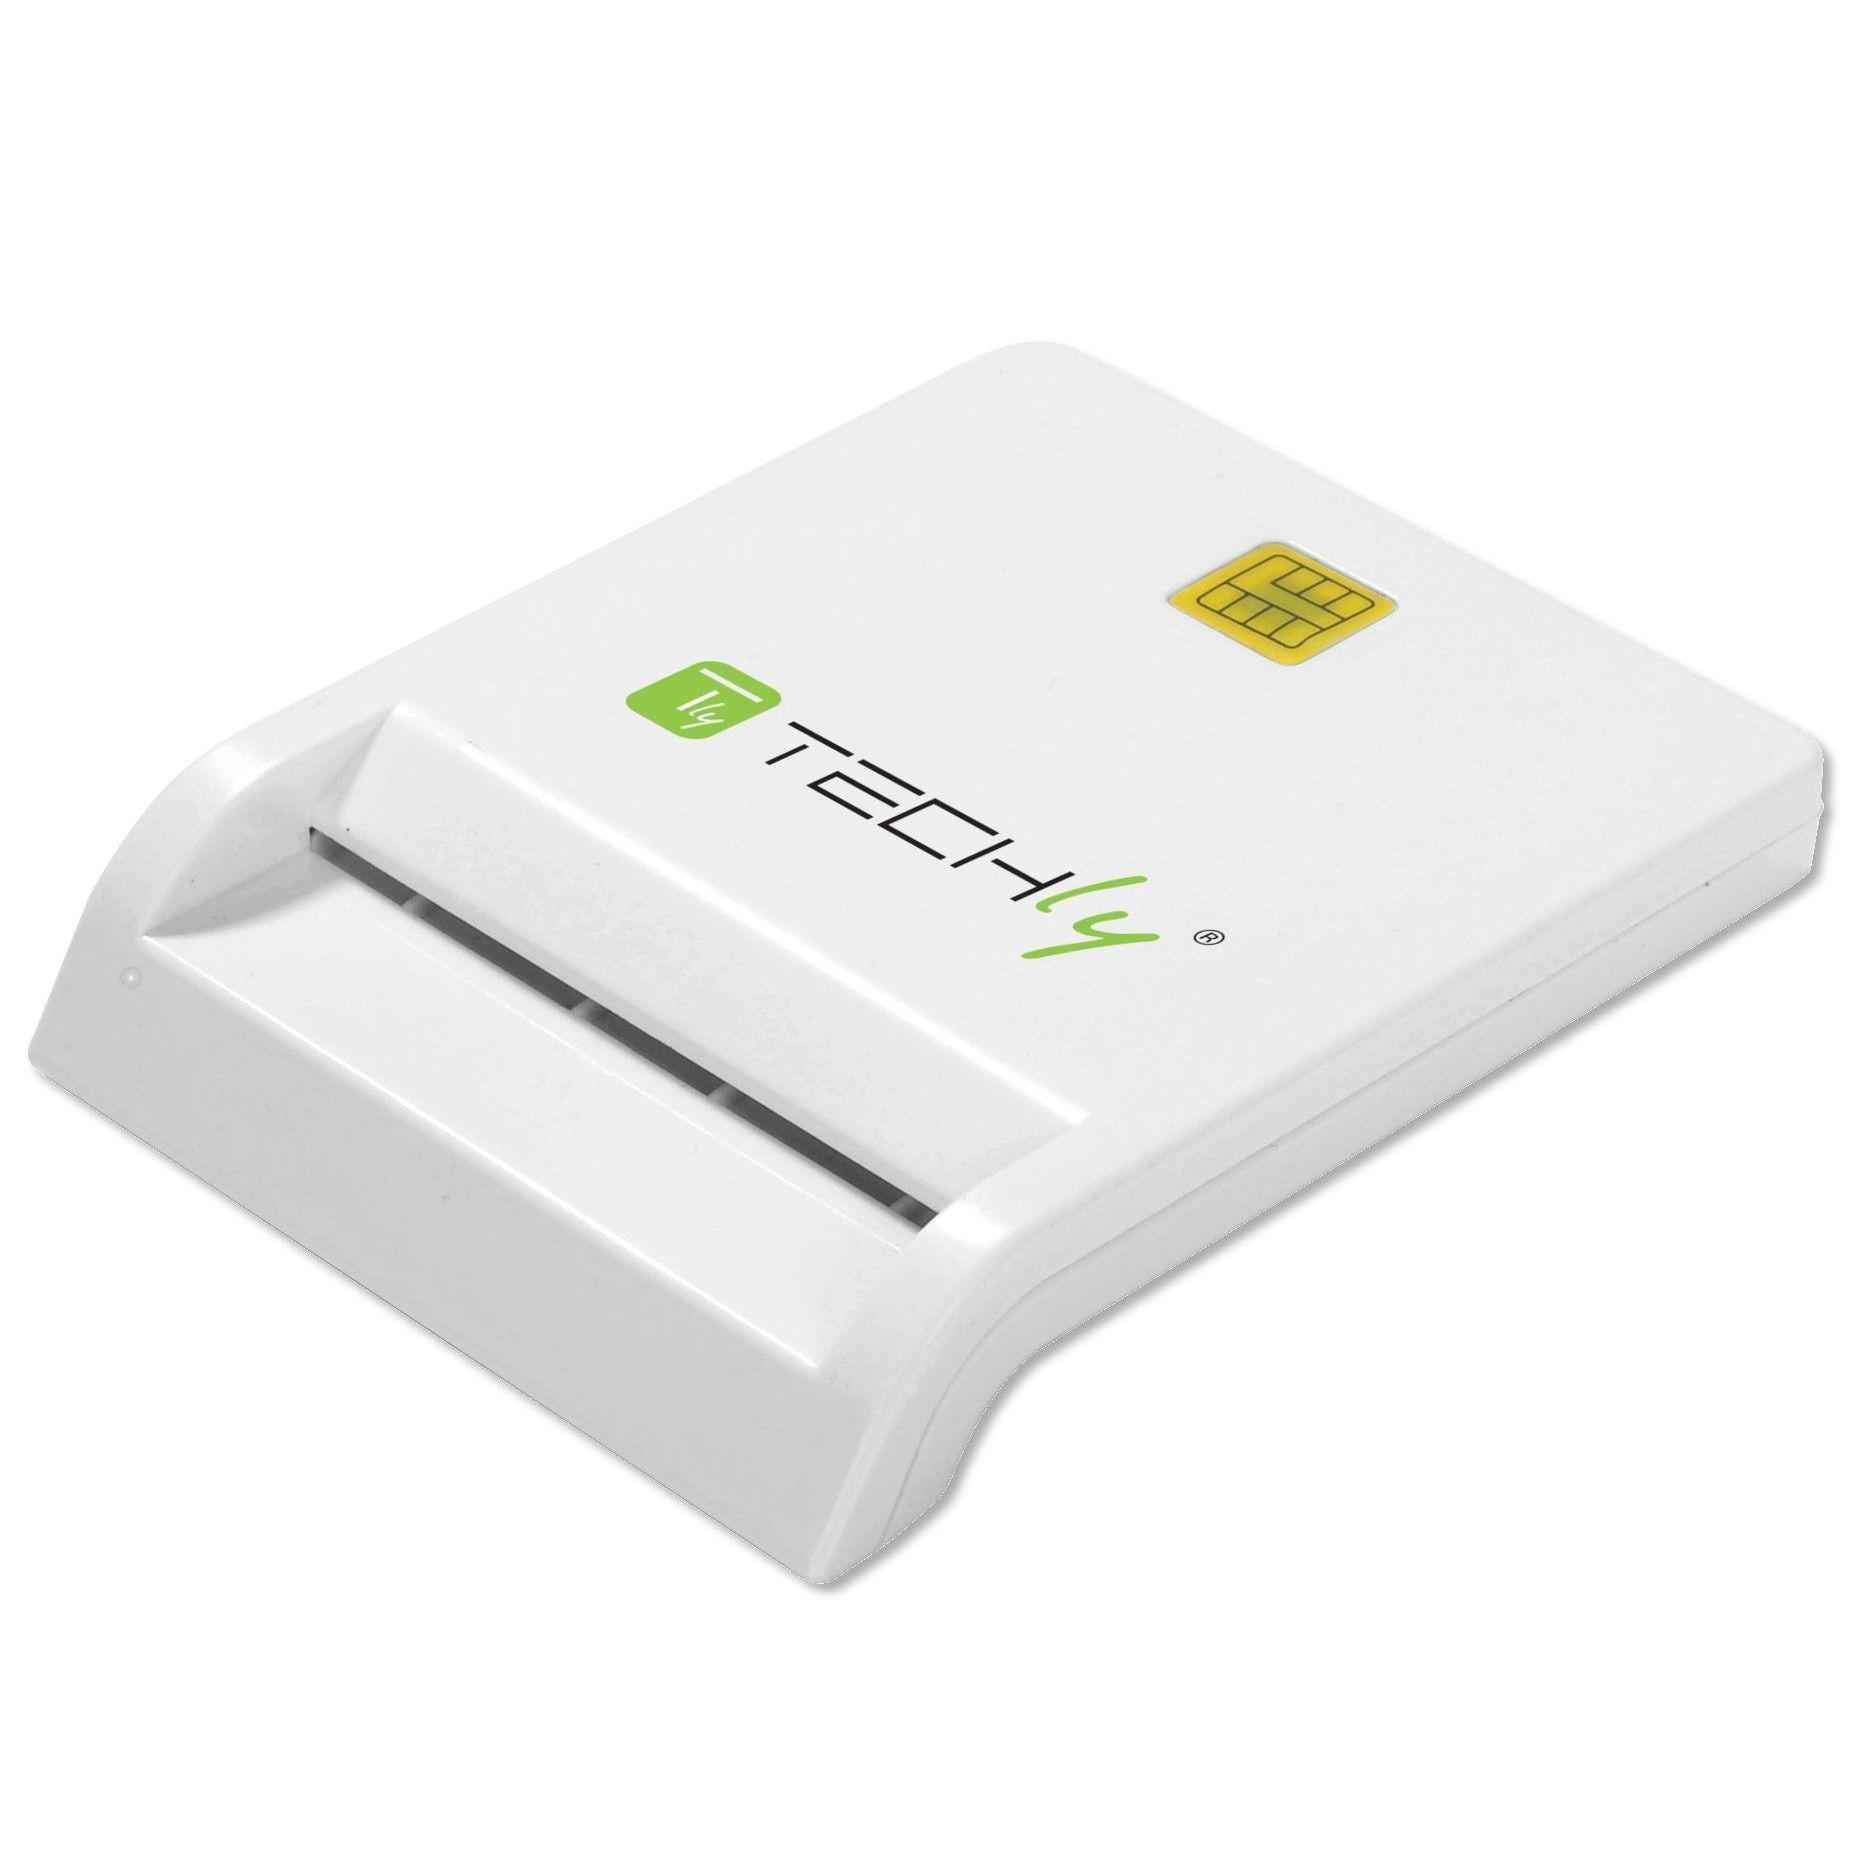 Techly Compact /Writer USB2.0 White I-CARD CAM-USB2TY smart card reader Indoor_1